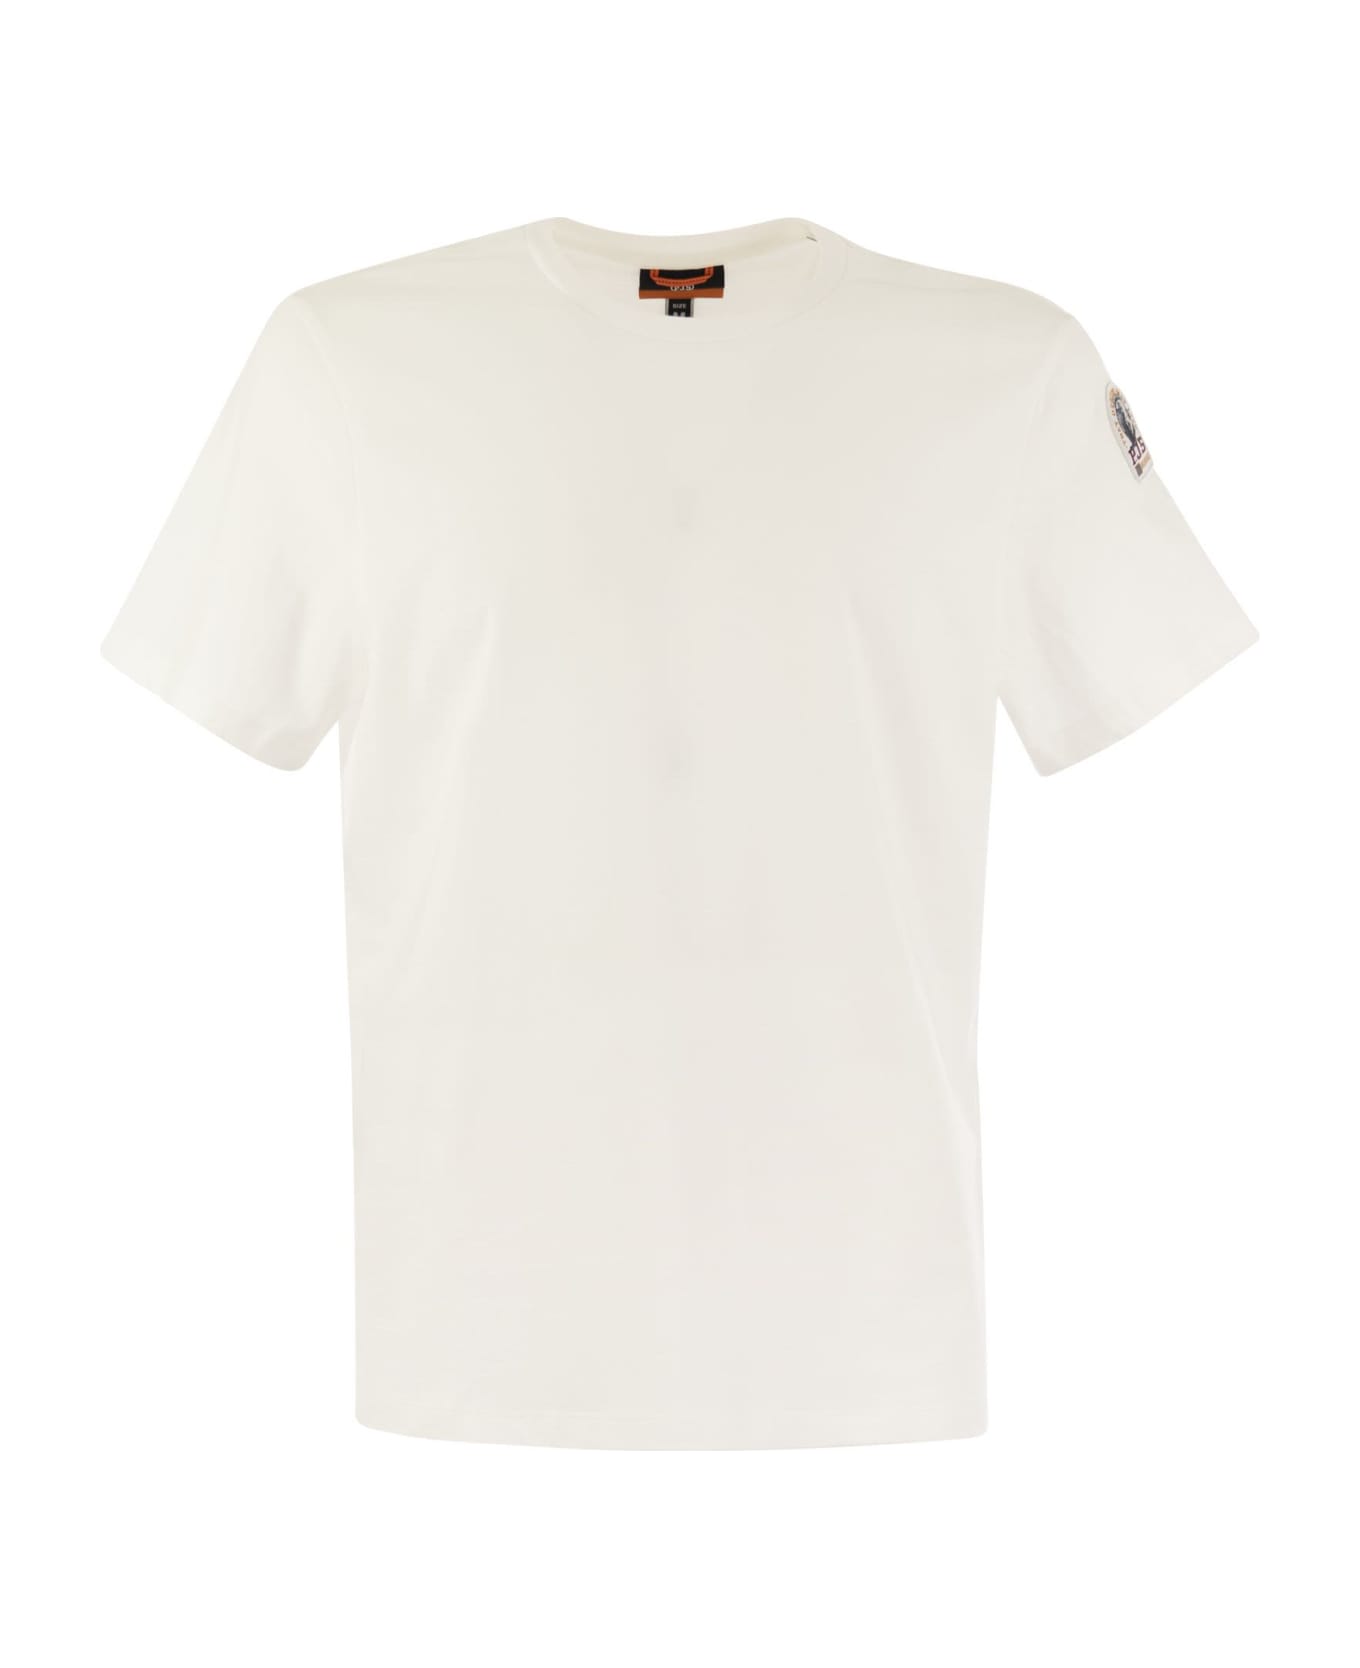 Parajumpers Shispare Tee - Cotton Jersey T-shirt - White